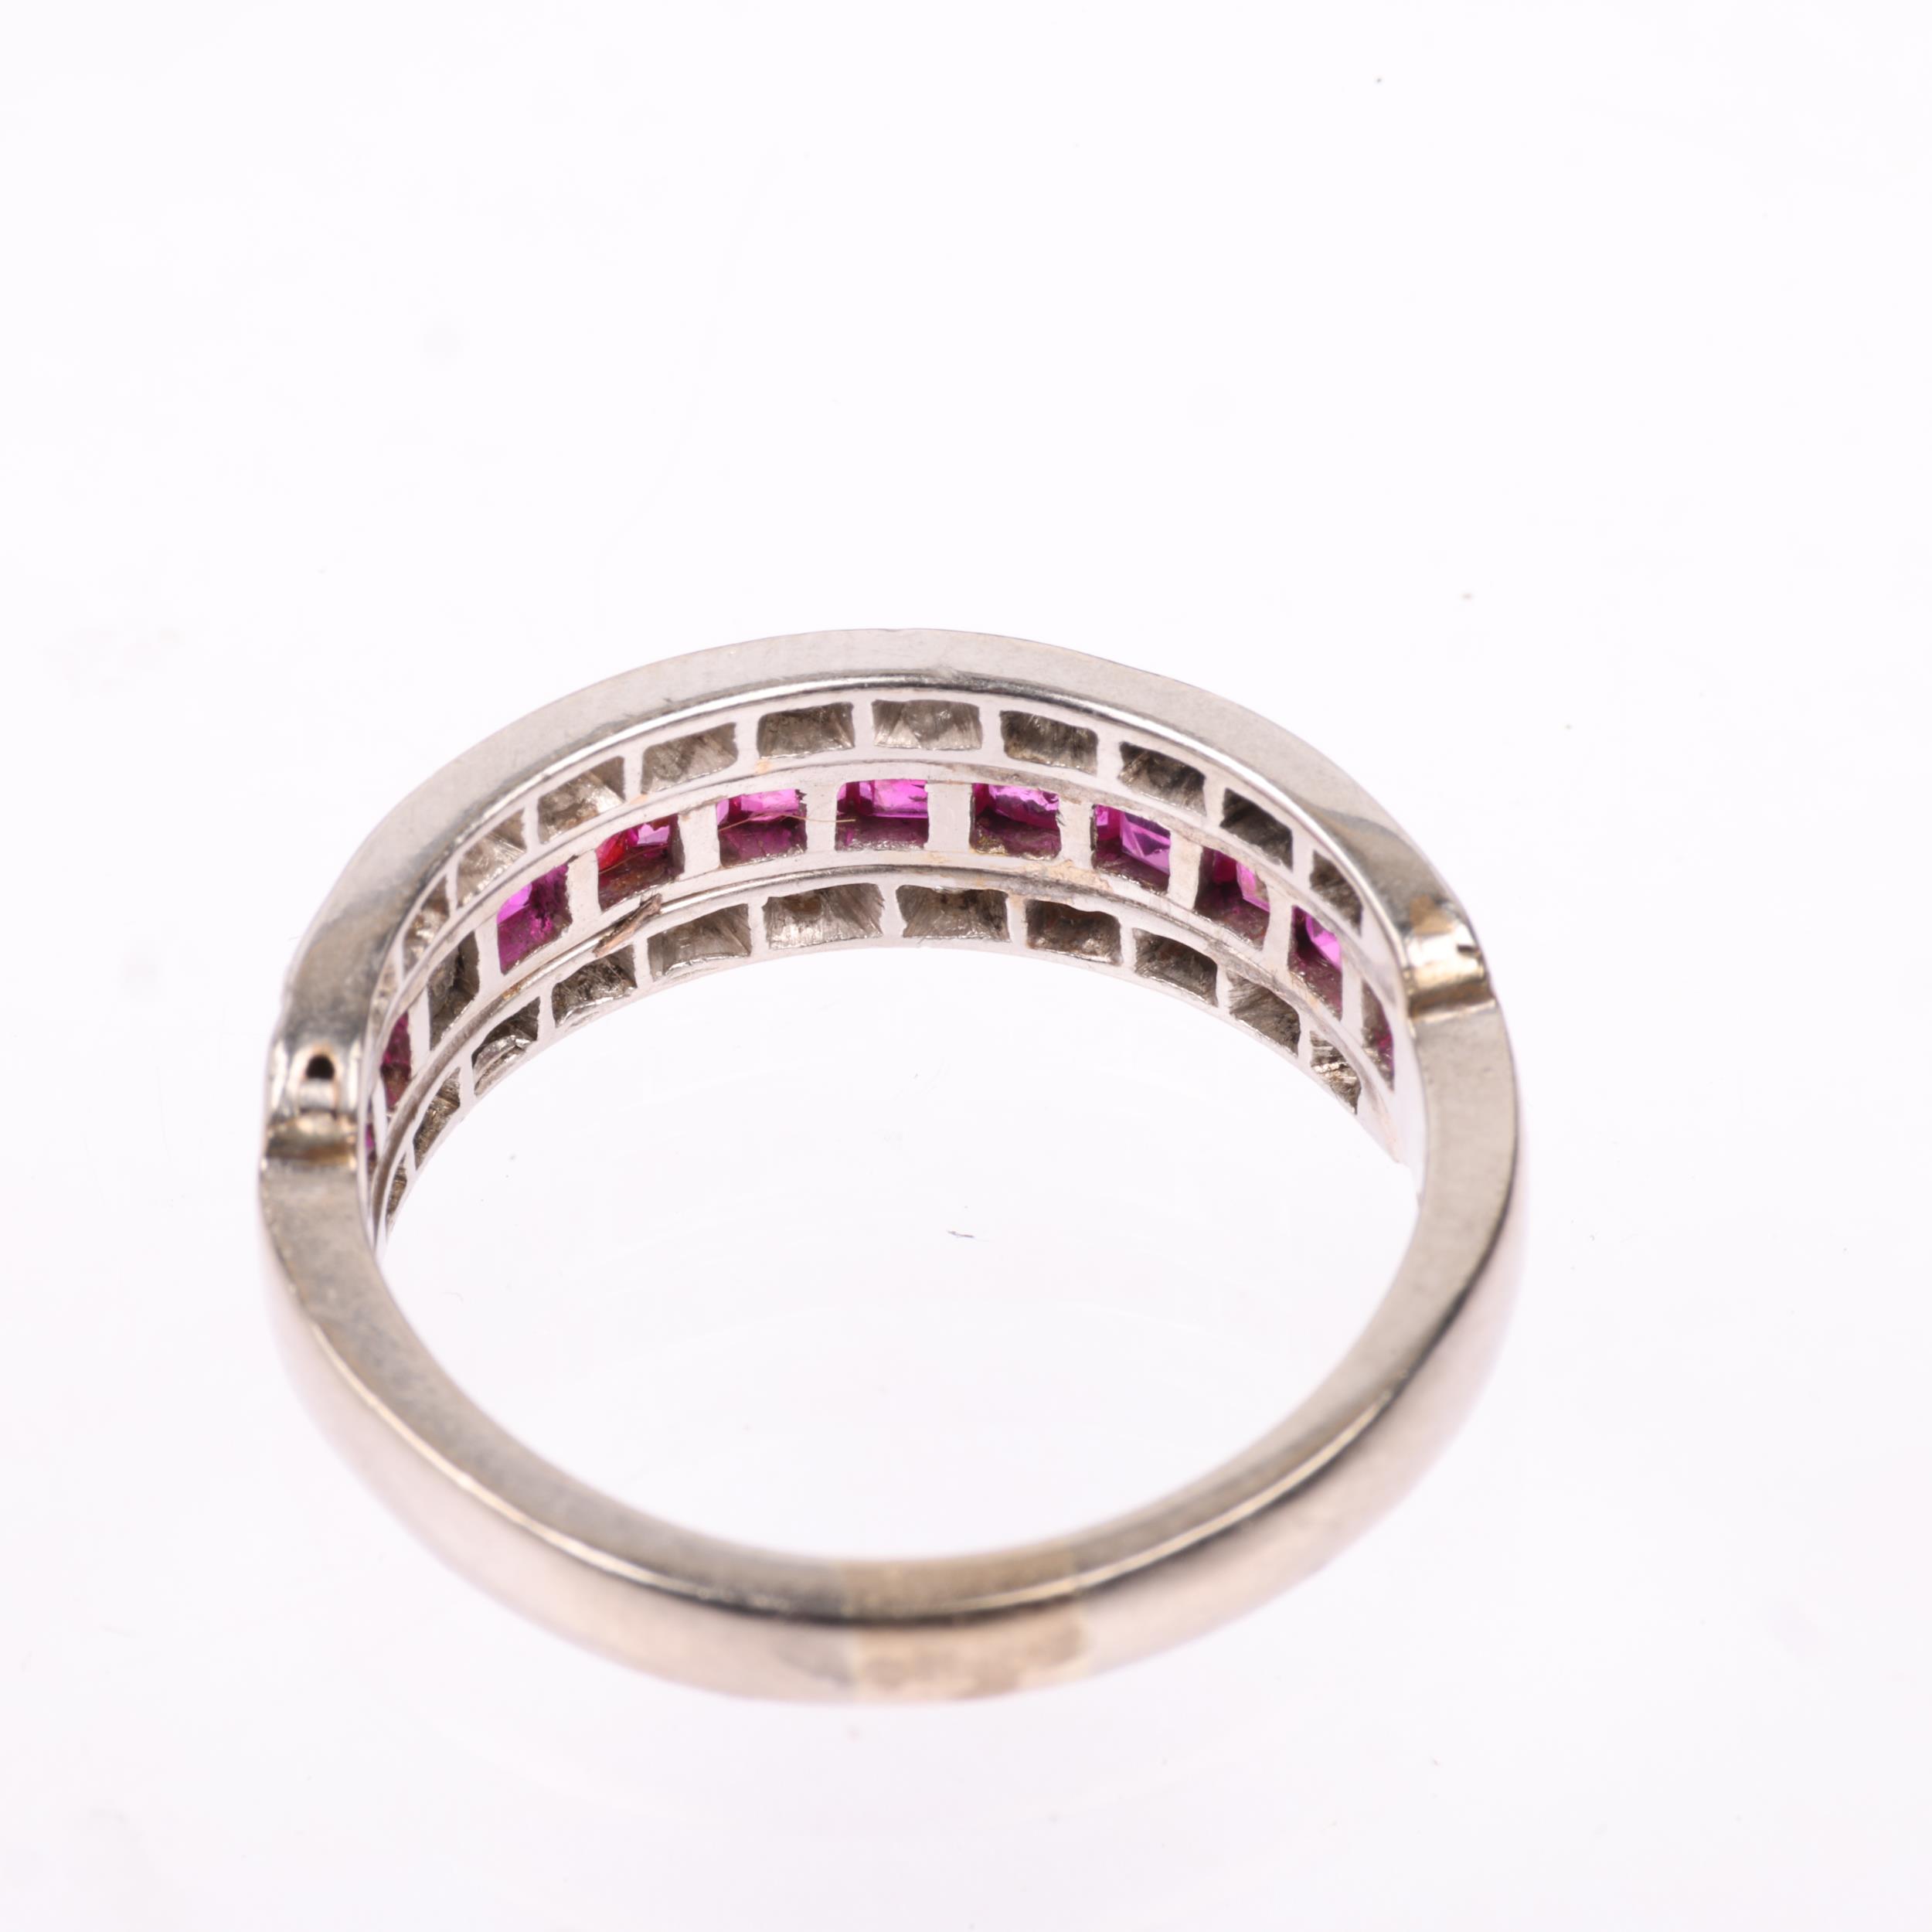 An Art Deco ruby and diamond triple row half eternity ring, circa 1925, channel and pave set with - Image 3 of 4